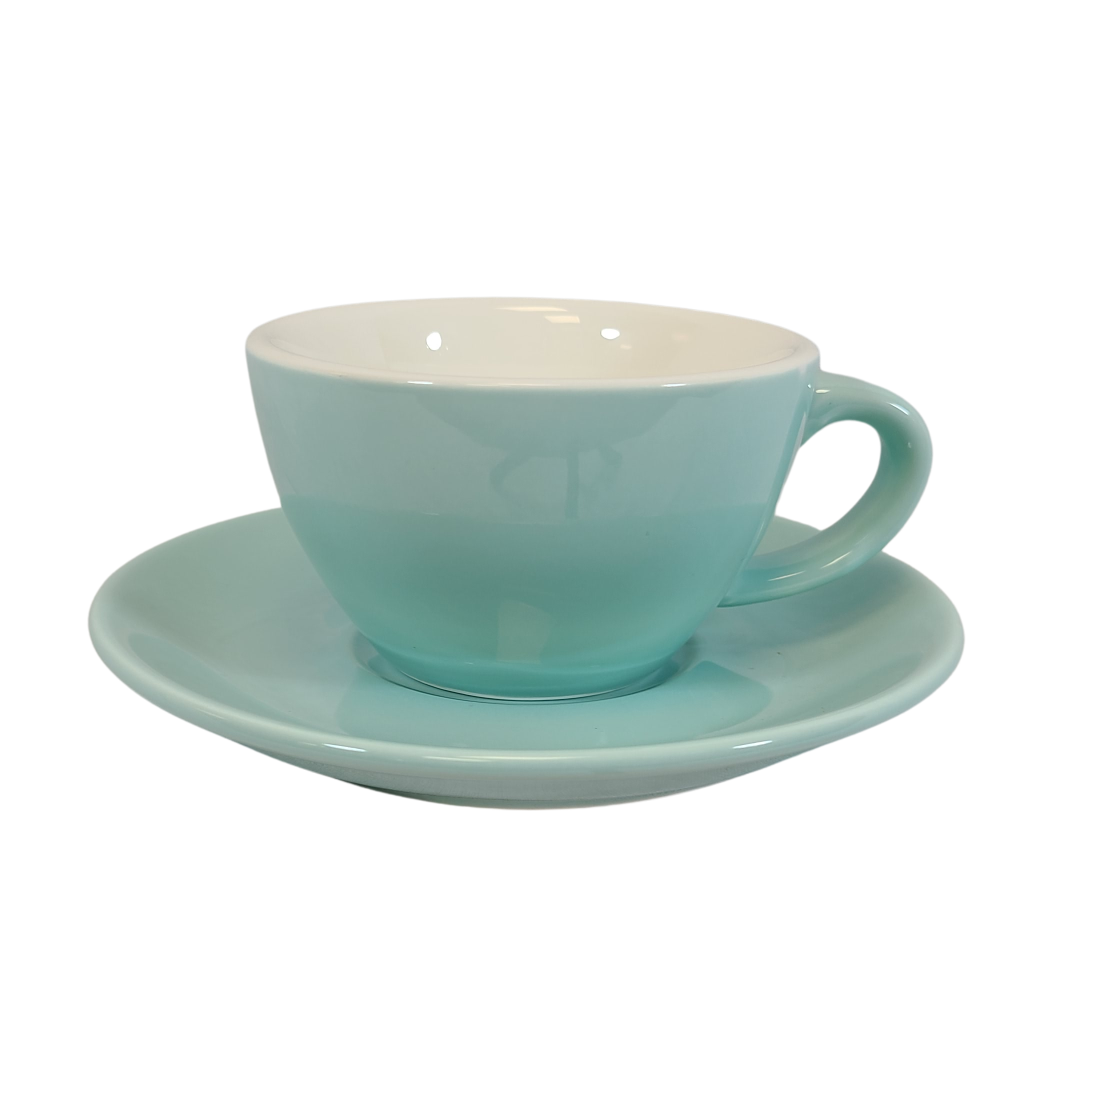 Coffee Addicts commercial ceramic cup with saucer in glossy blue cappuccino cortado cup 5oz 150ml